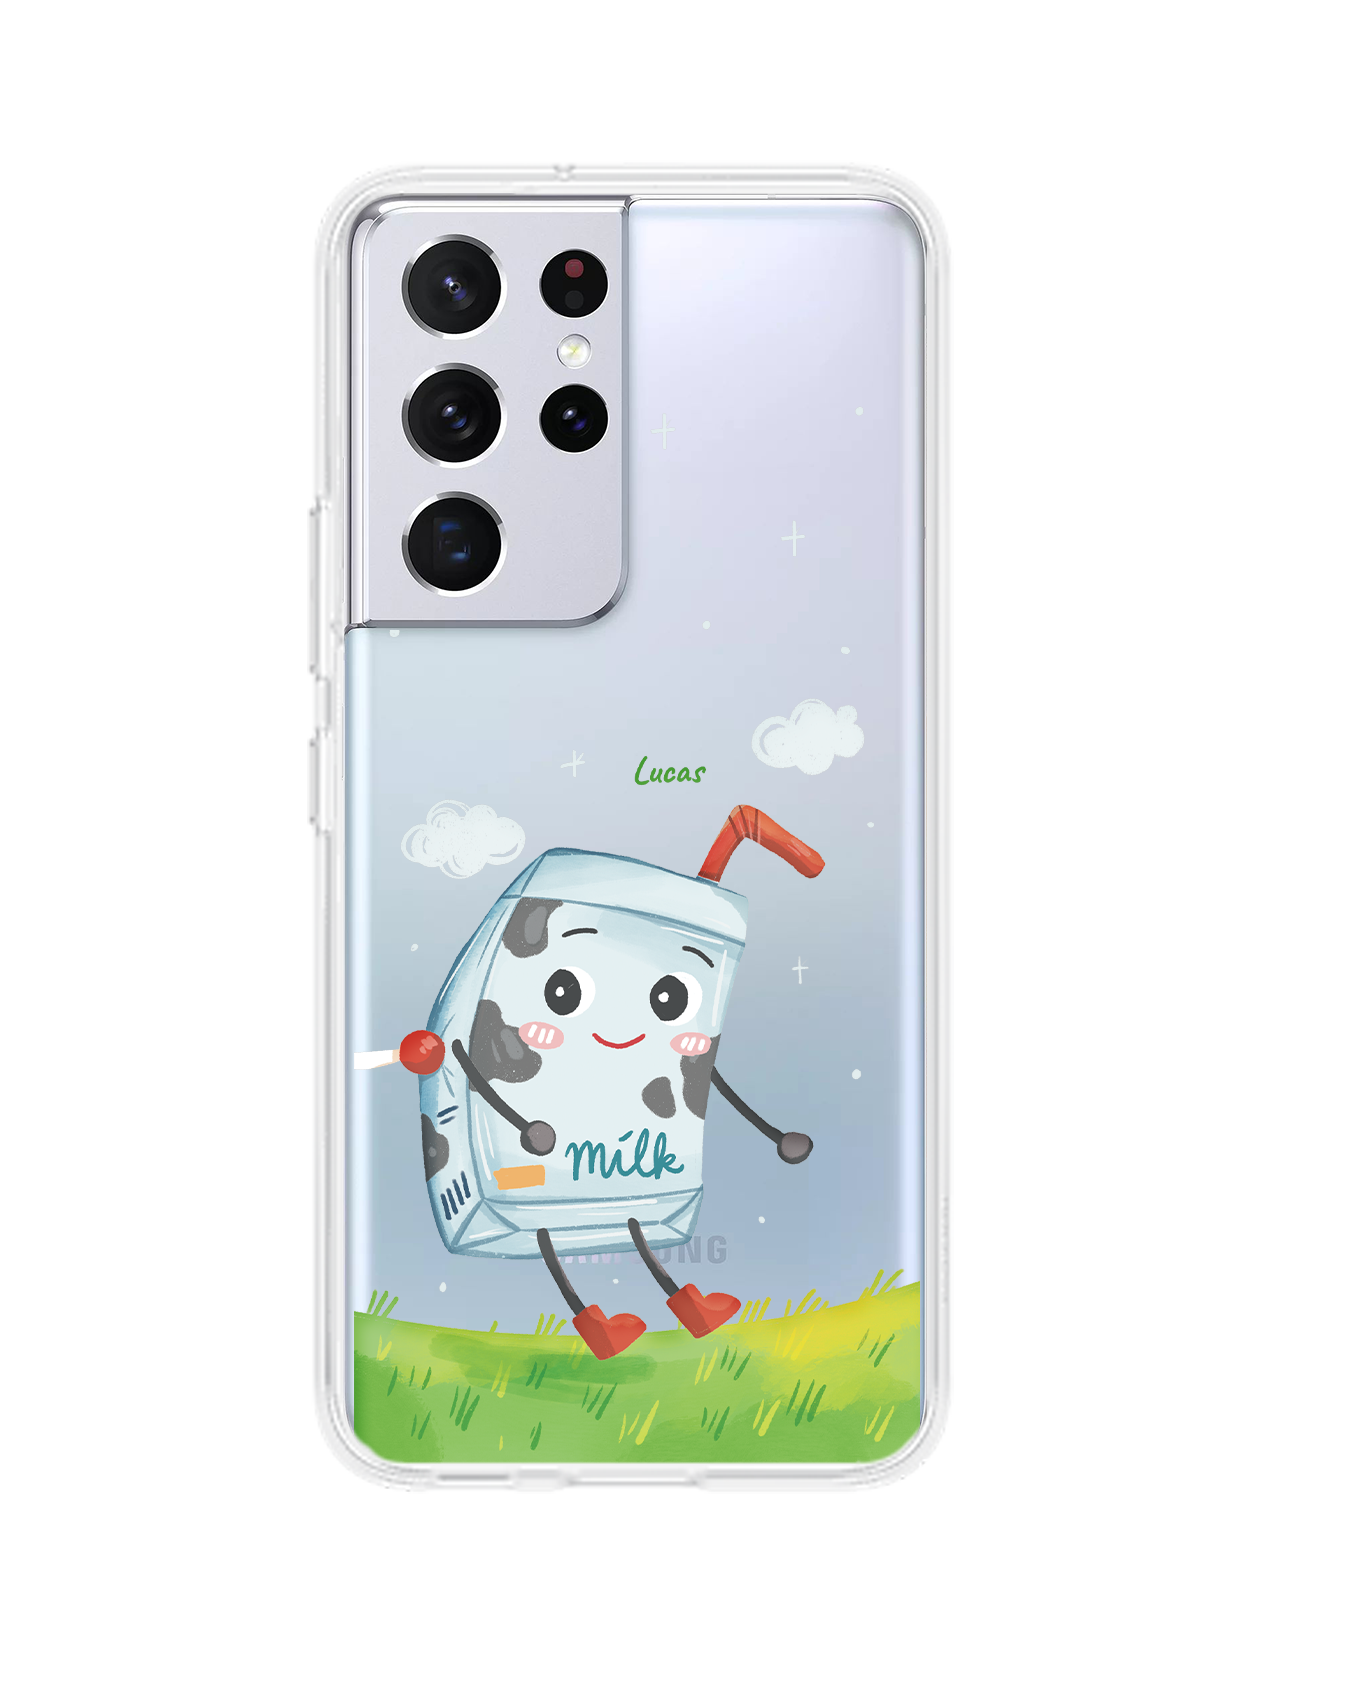 Android Rearguard Hybrid Case - Milk to my Cookies (Couple Case)